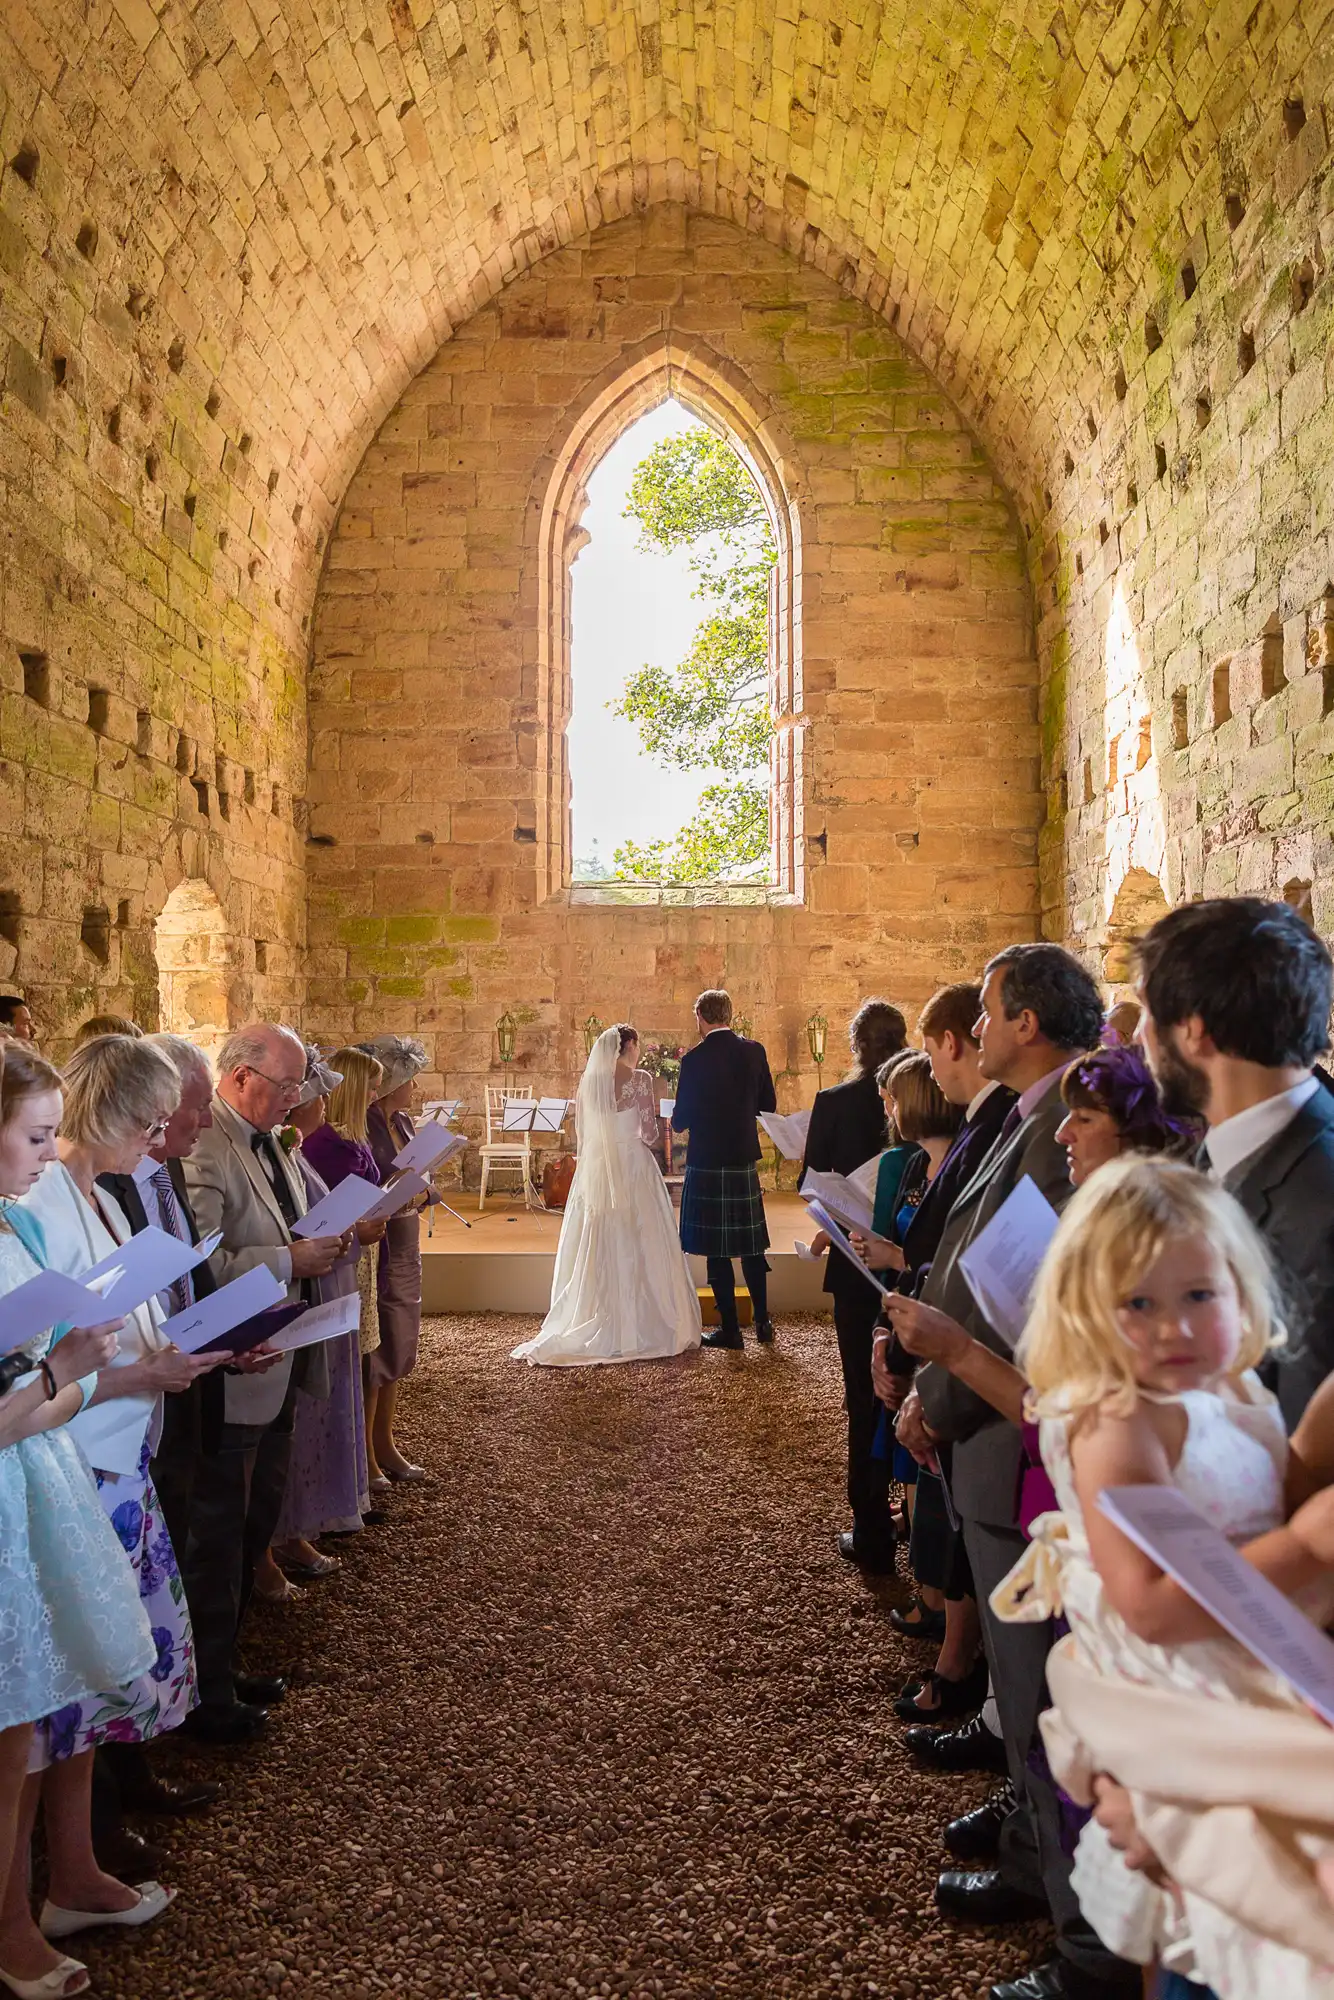 A wedding ceremony inside a historical stone chapel with guests and a couple at the altar, large arched window in the background.